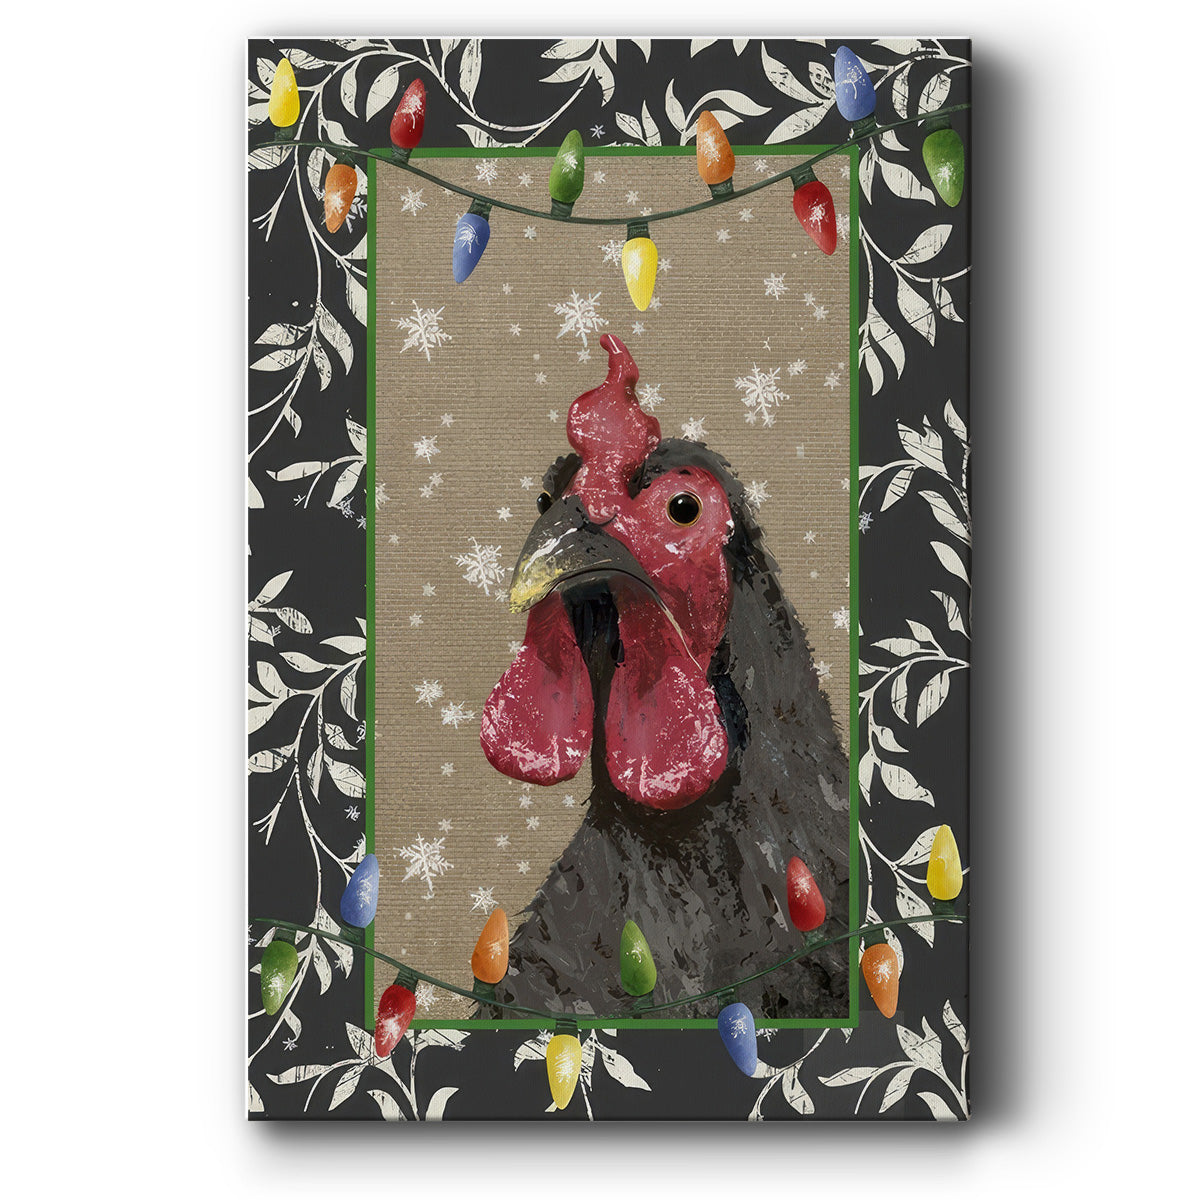 County Christmas Farm IV - Gallery Wrapped Canvas